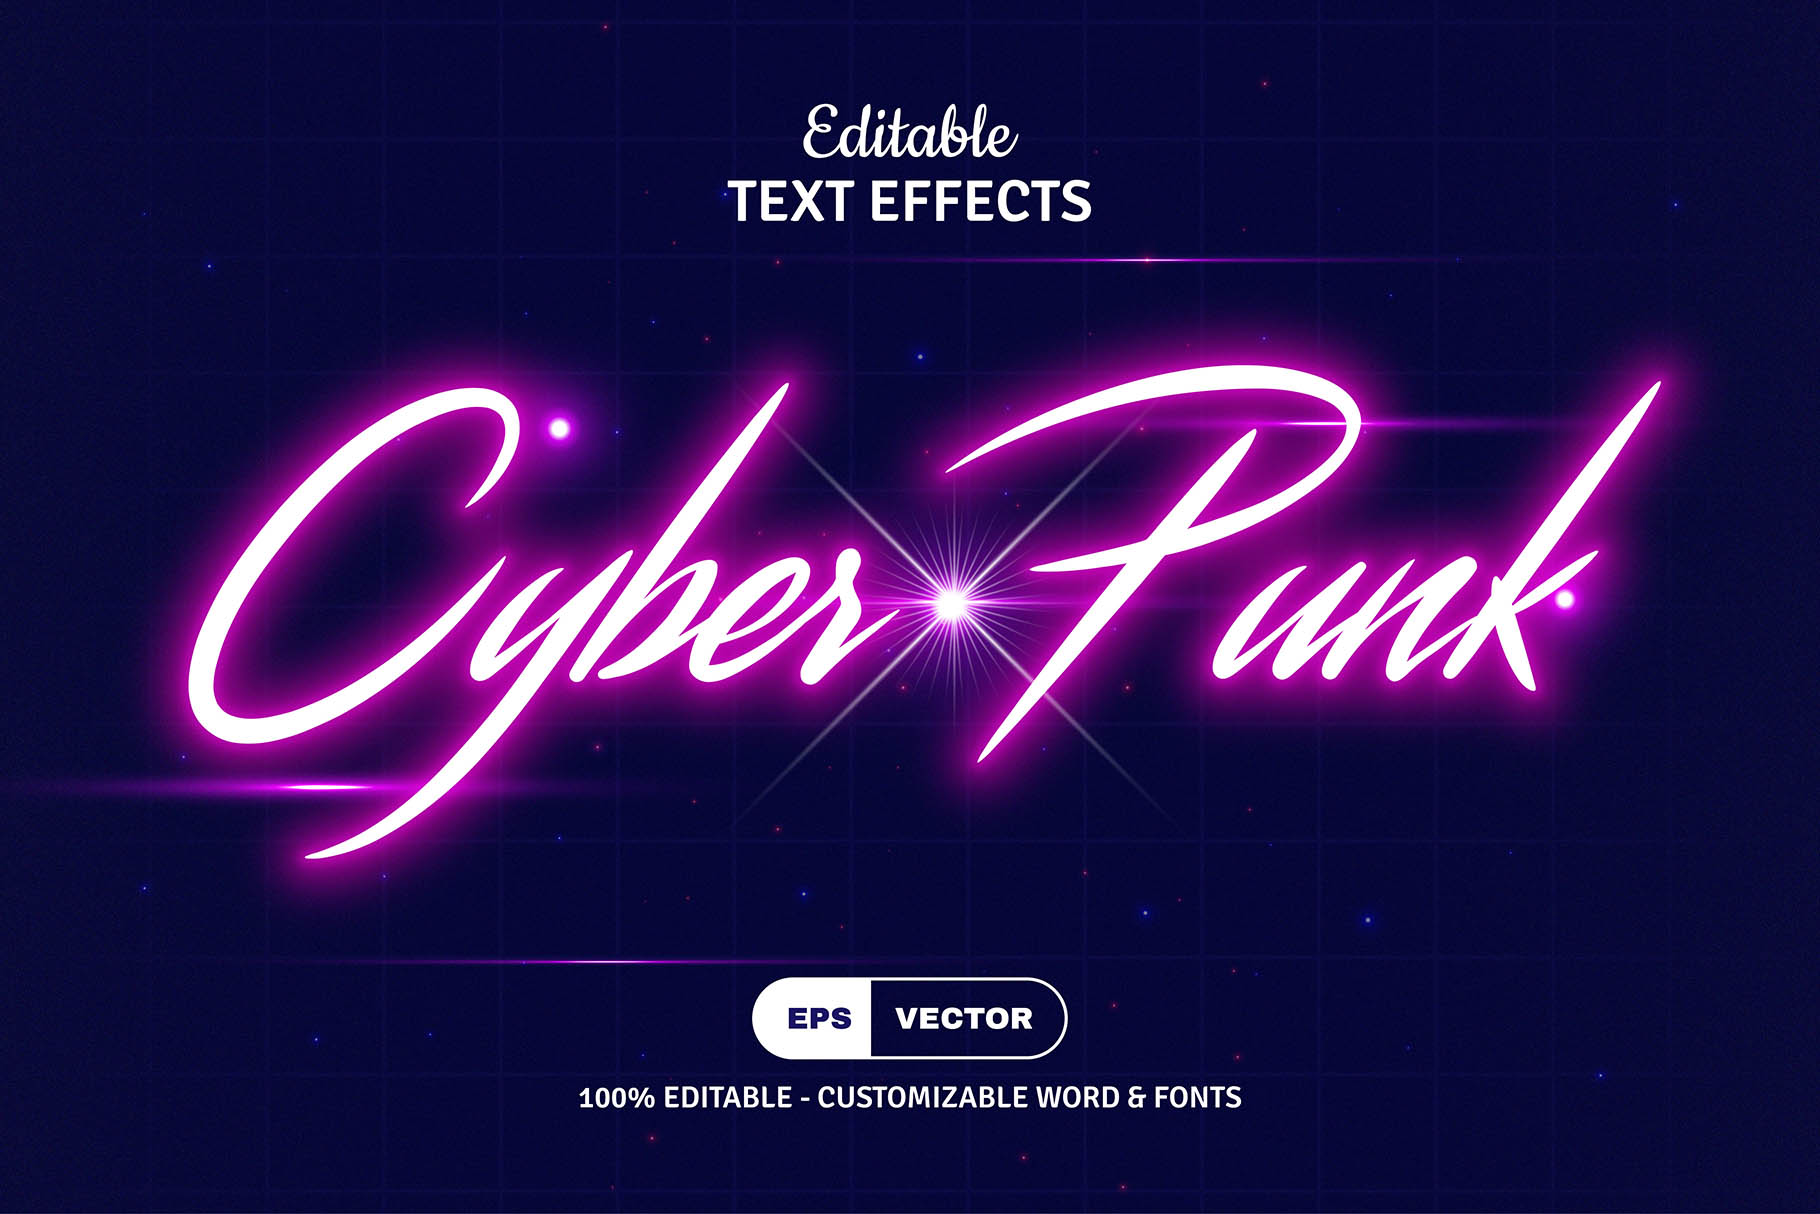 80s text effects 17 755